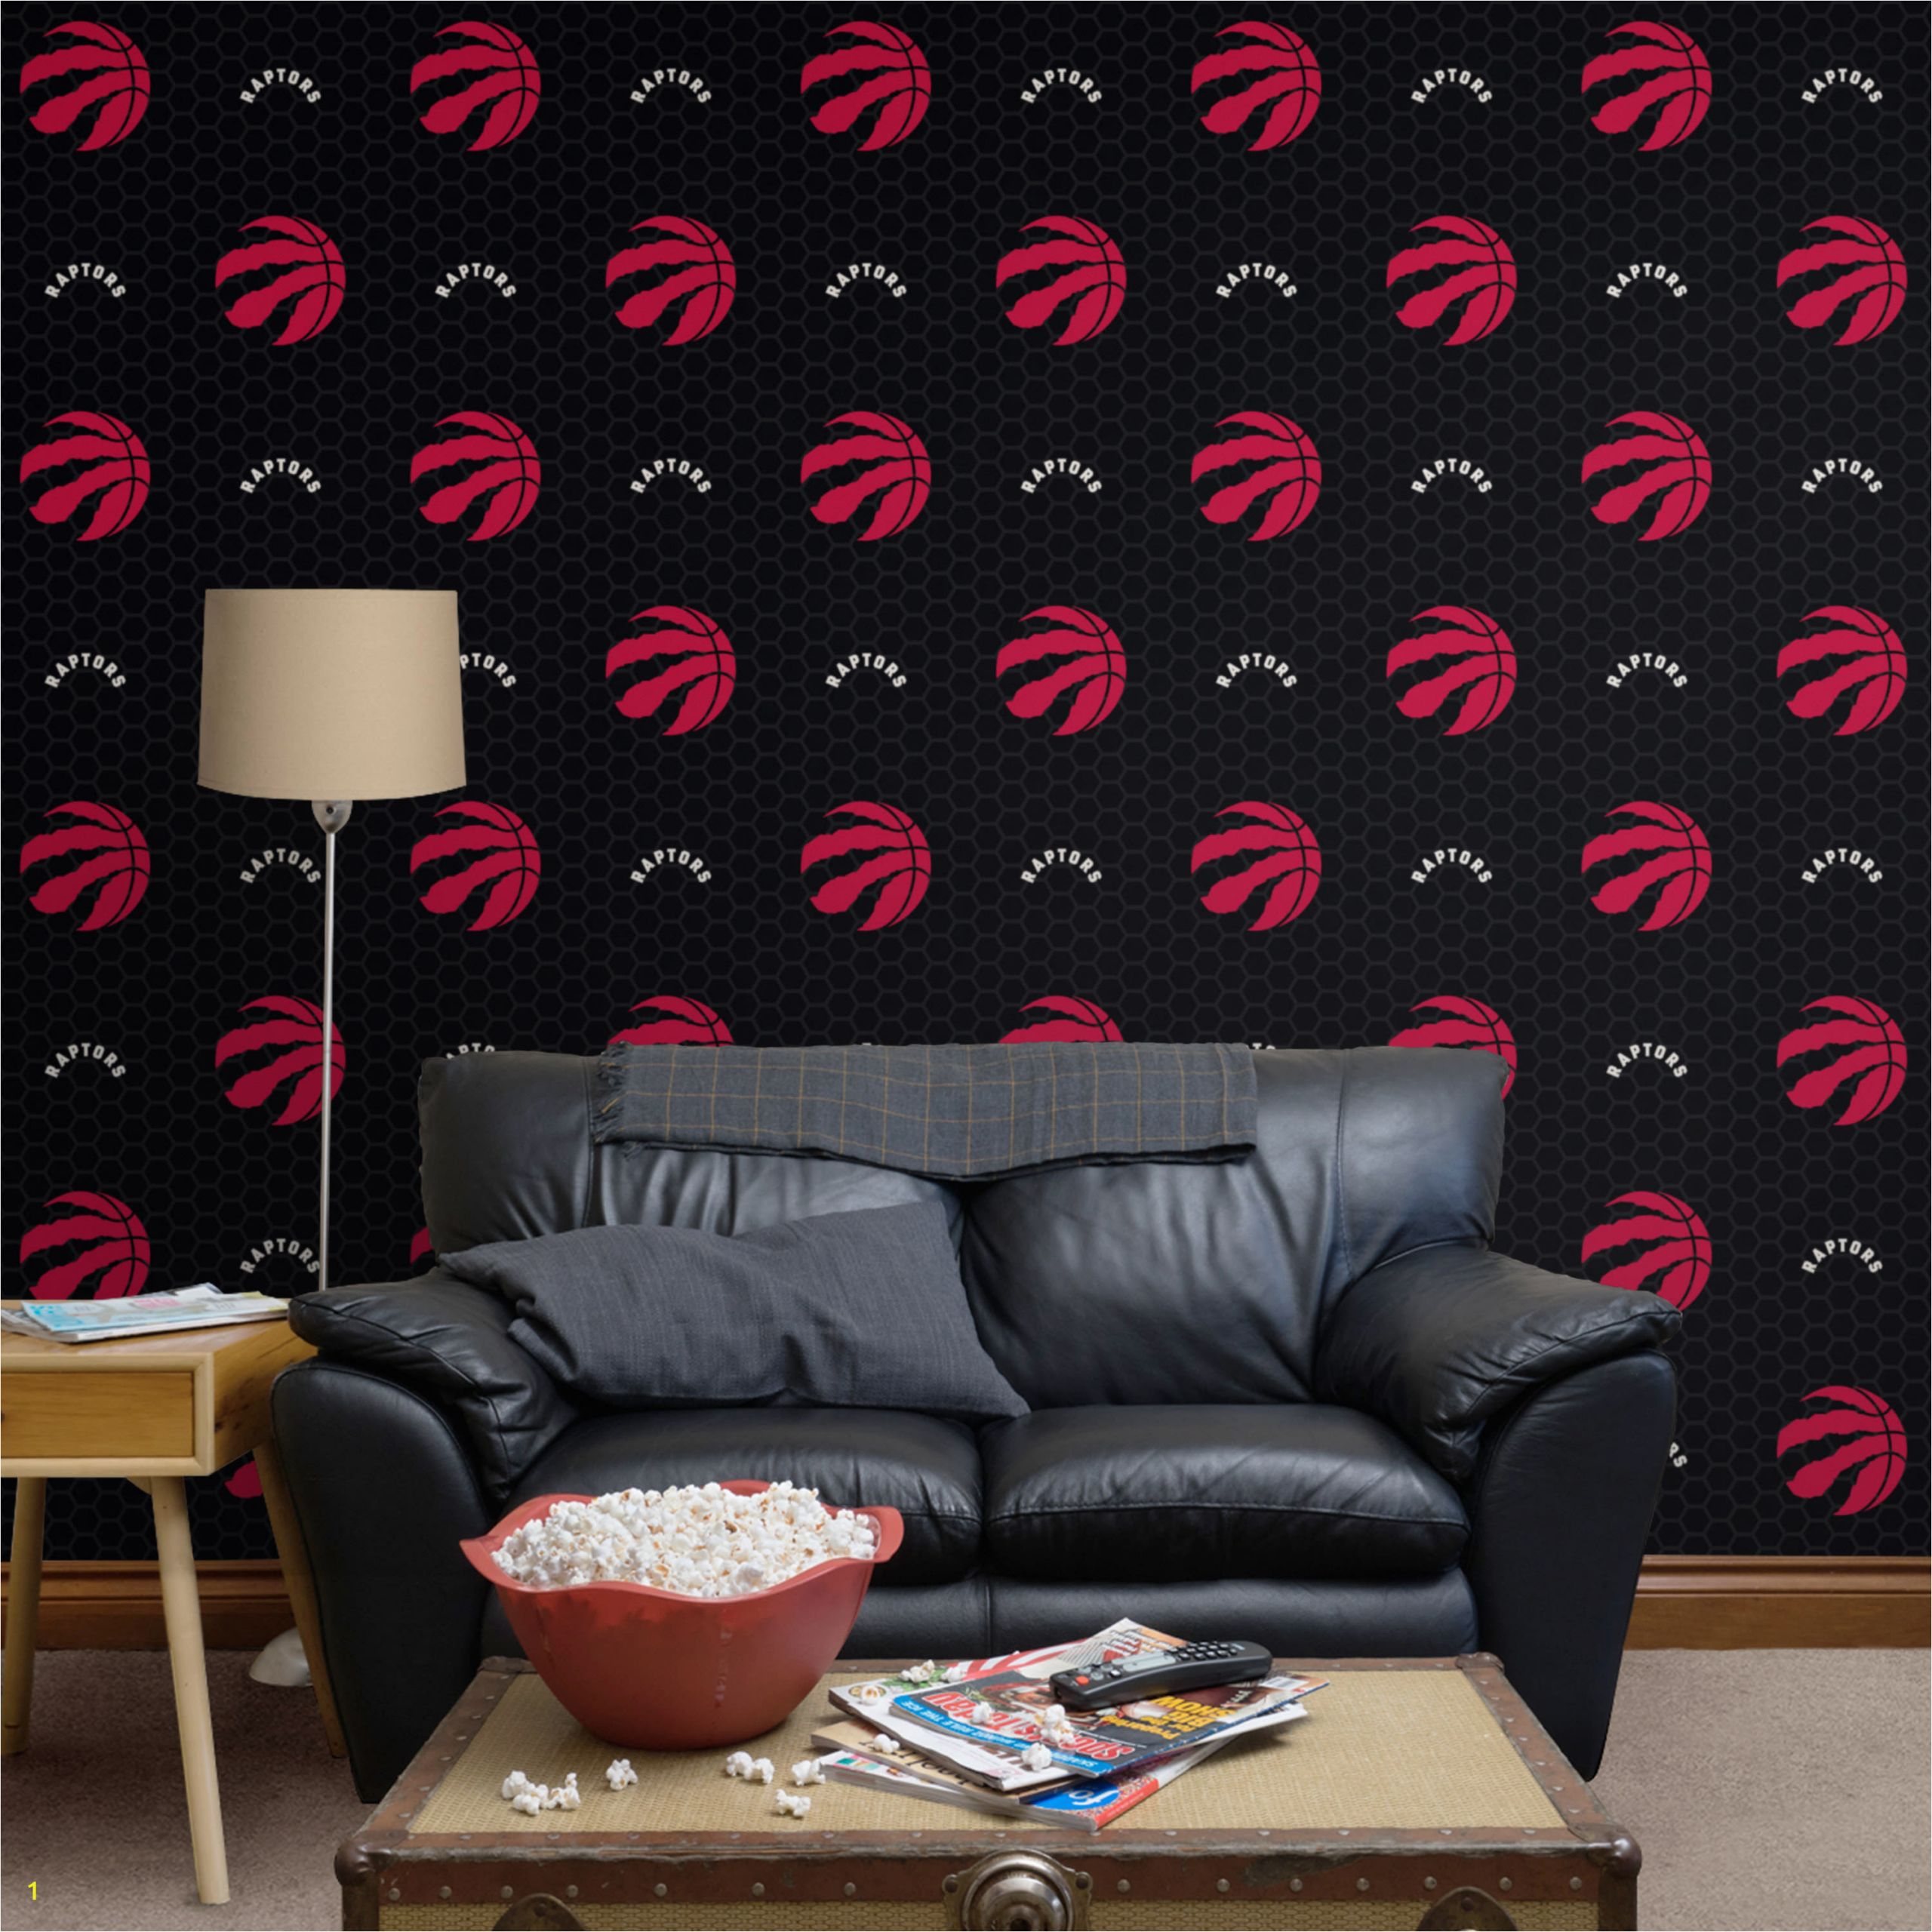 Touch Of Modern Wall Mural toronto Raptors Logo Pattern Black Ficially Licensed Removable Wallpaper